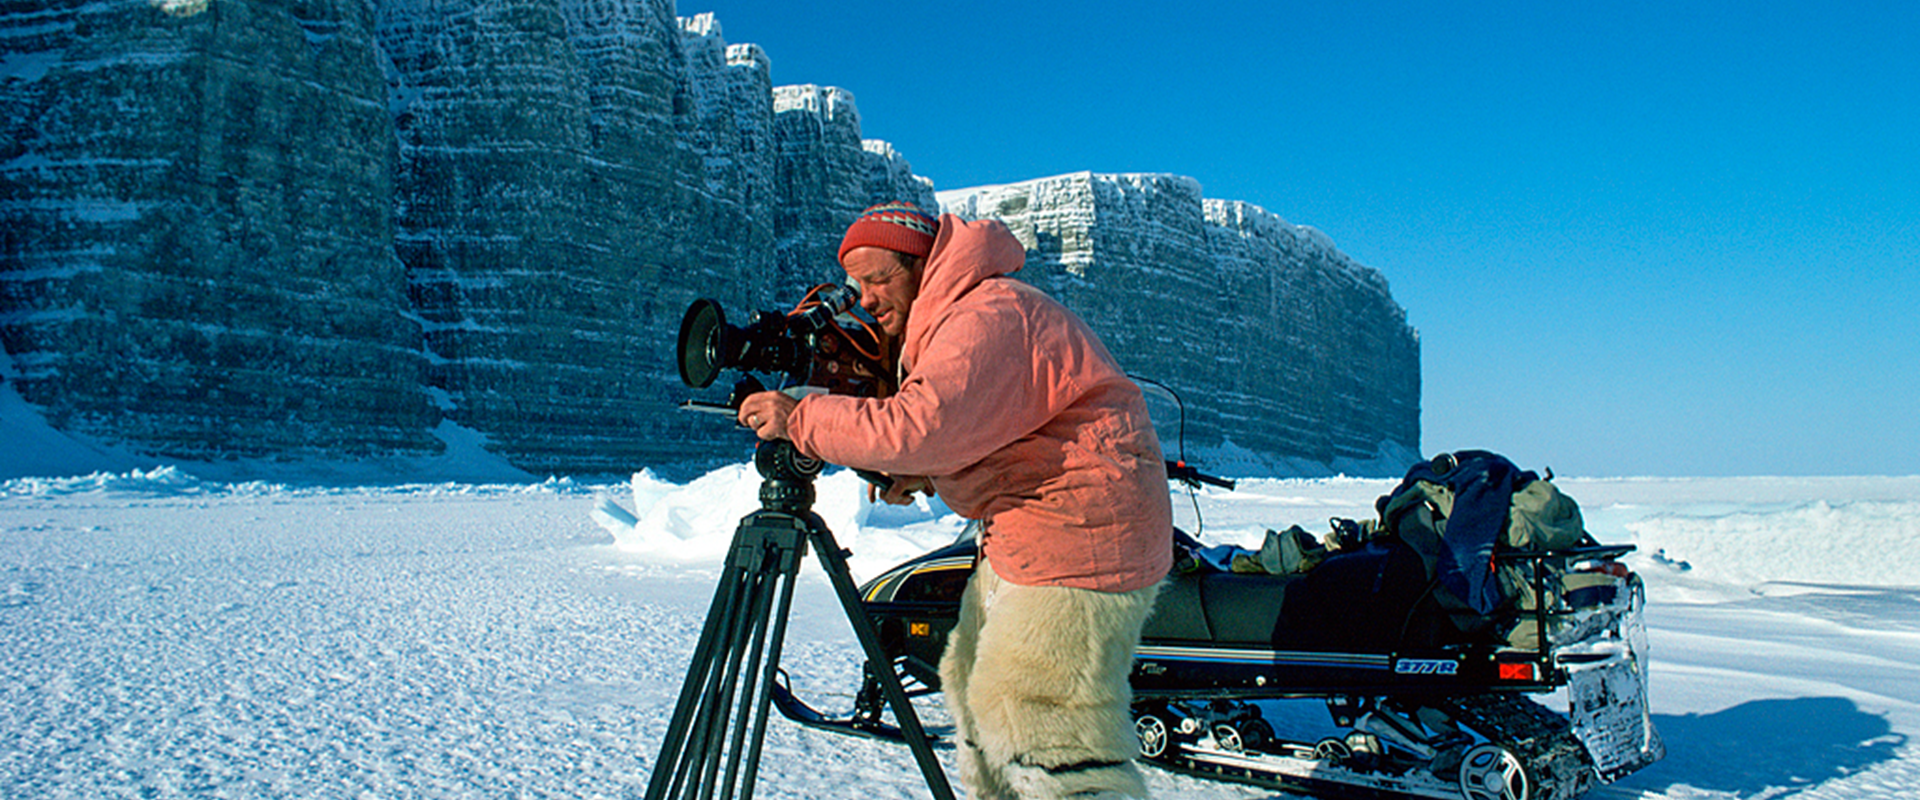 Doug Allan stands in pink jacket with camera on tripod.